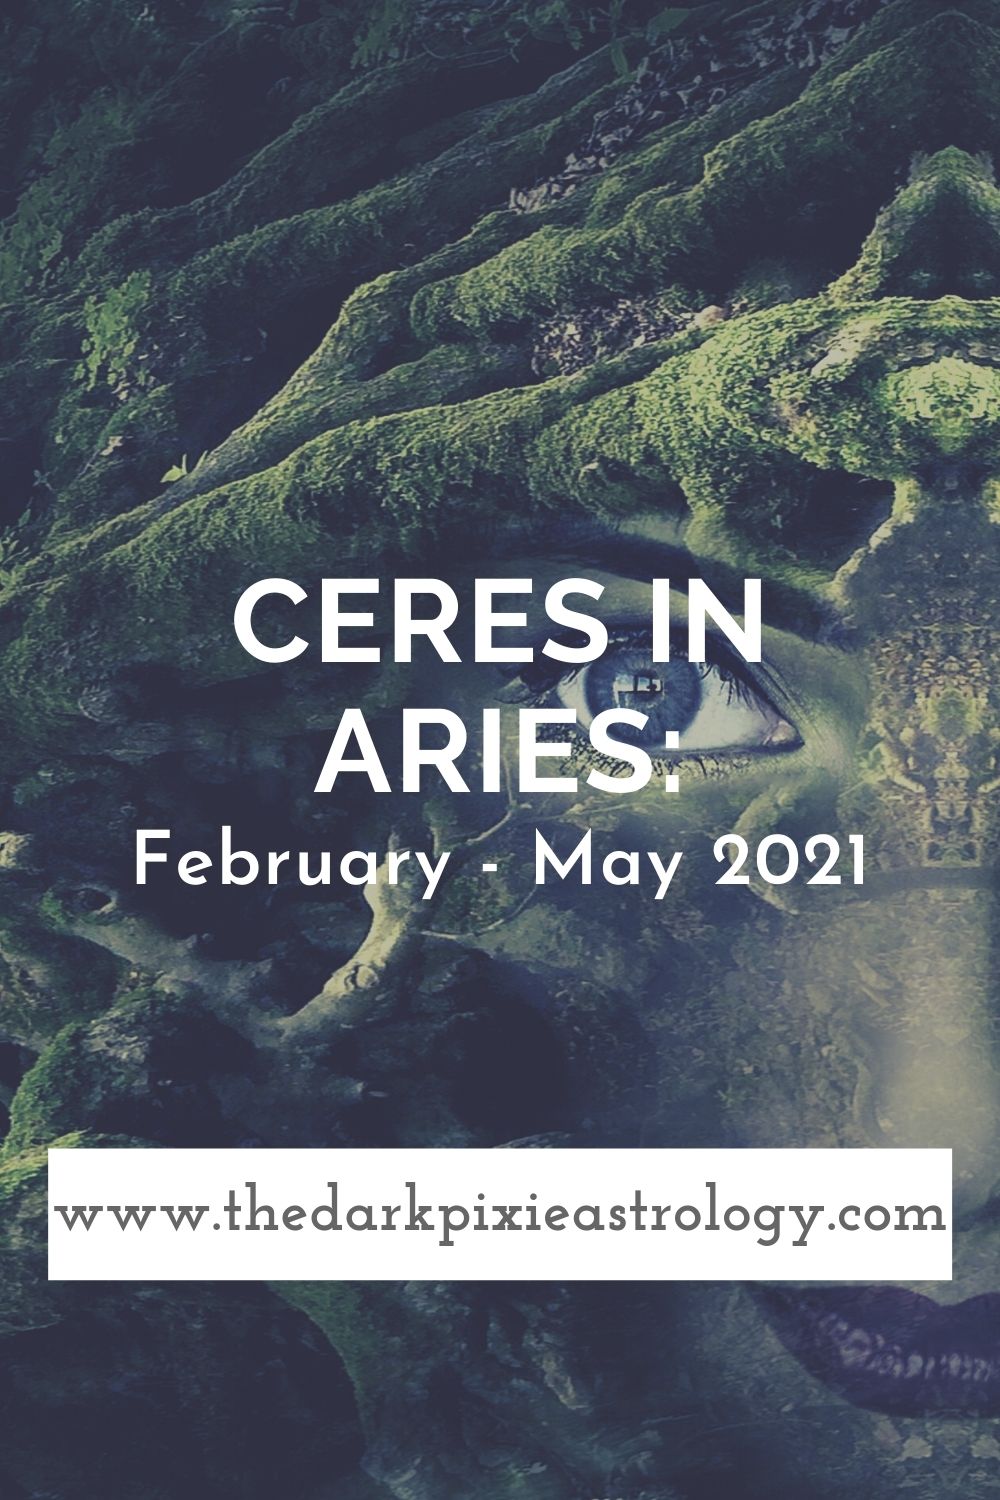 Ceres in Aries: February - May 2021 - The Dark Pixie Astrology